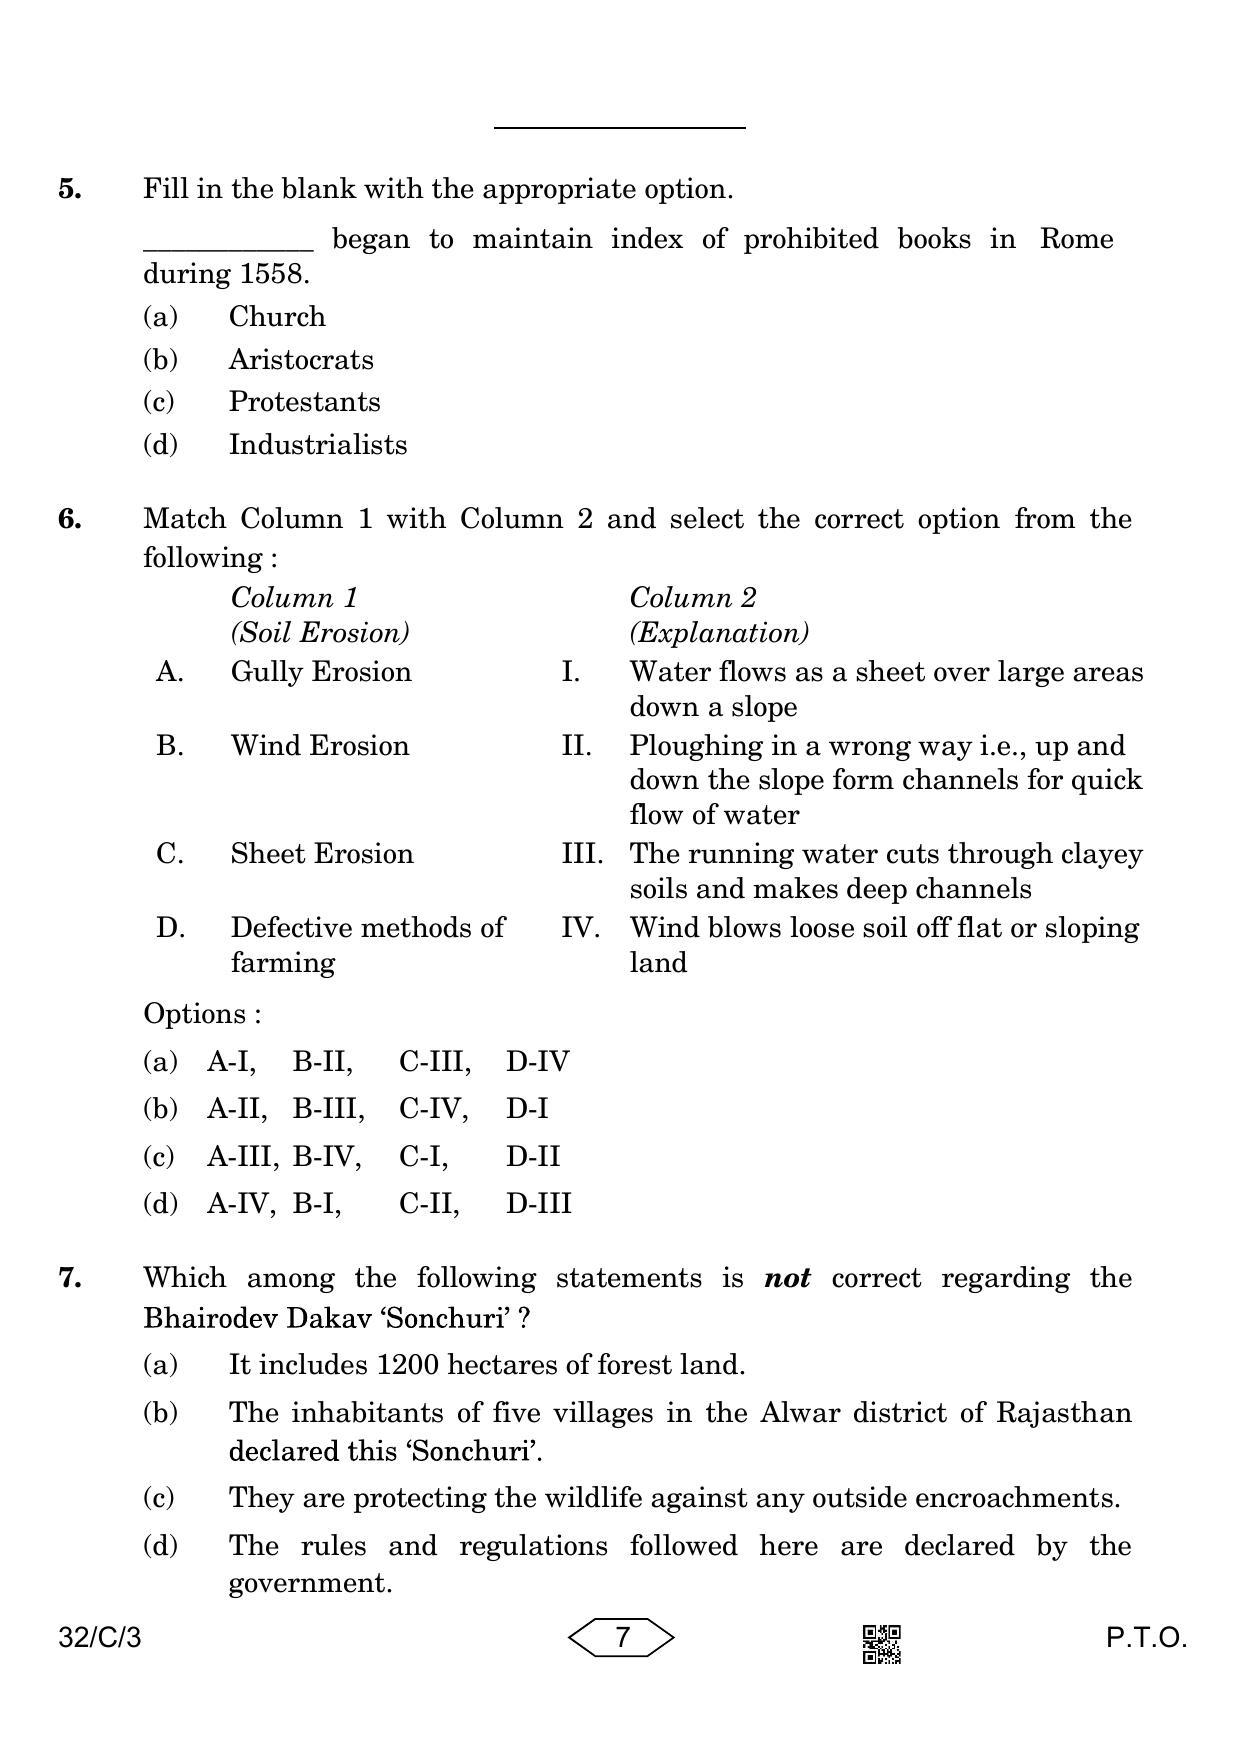 CBSE Class 10 32-3 Social Science 2023 (Compartment) Question Paper - Page 7